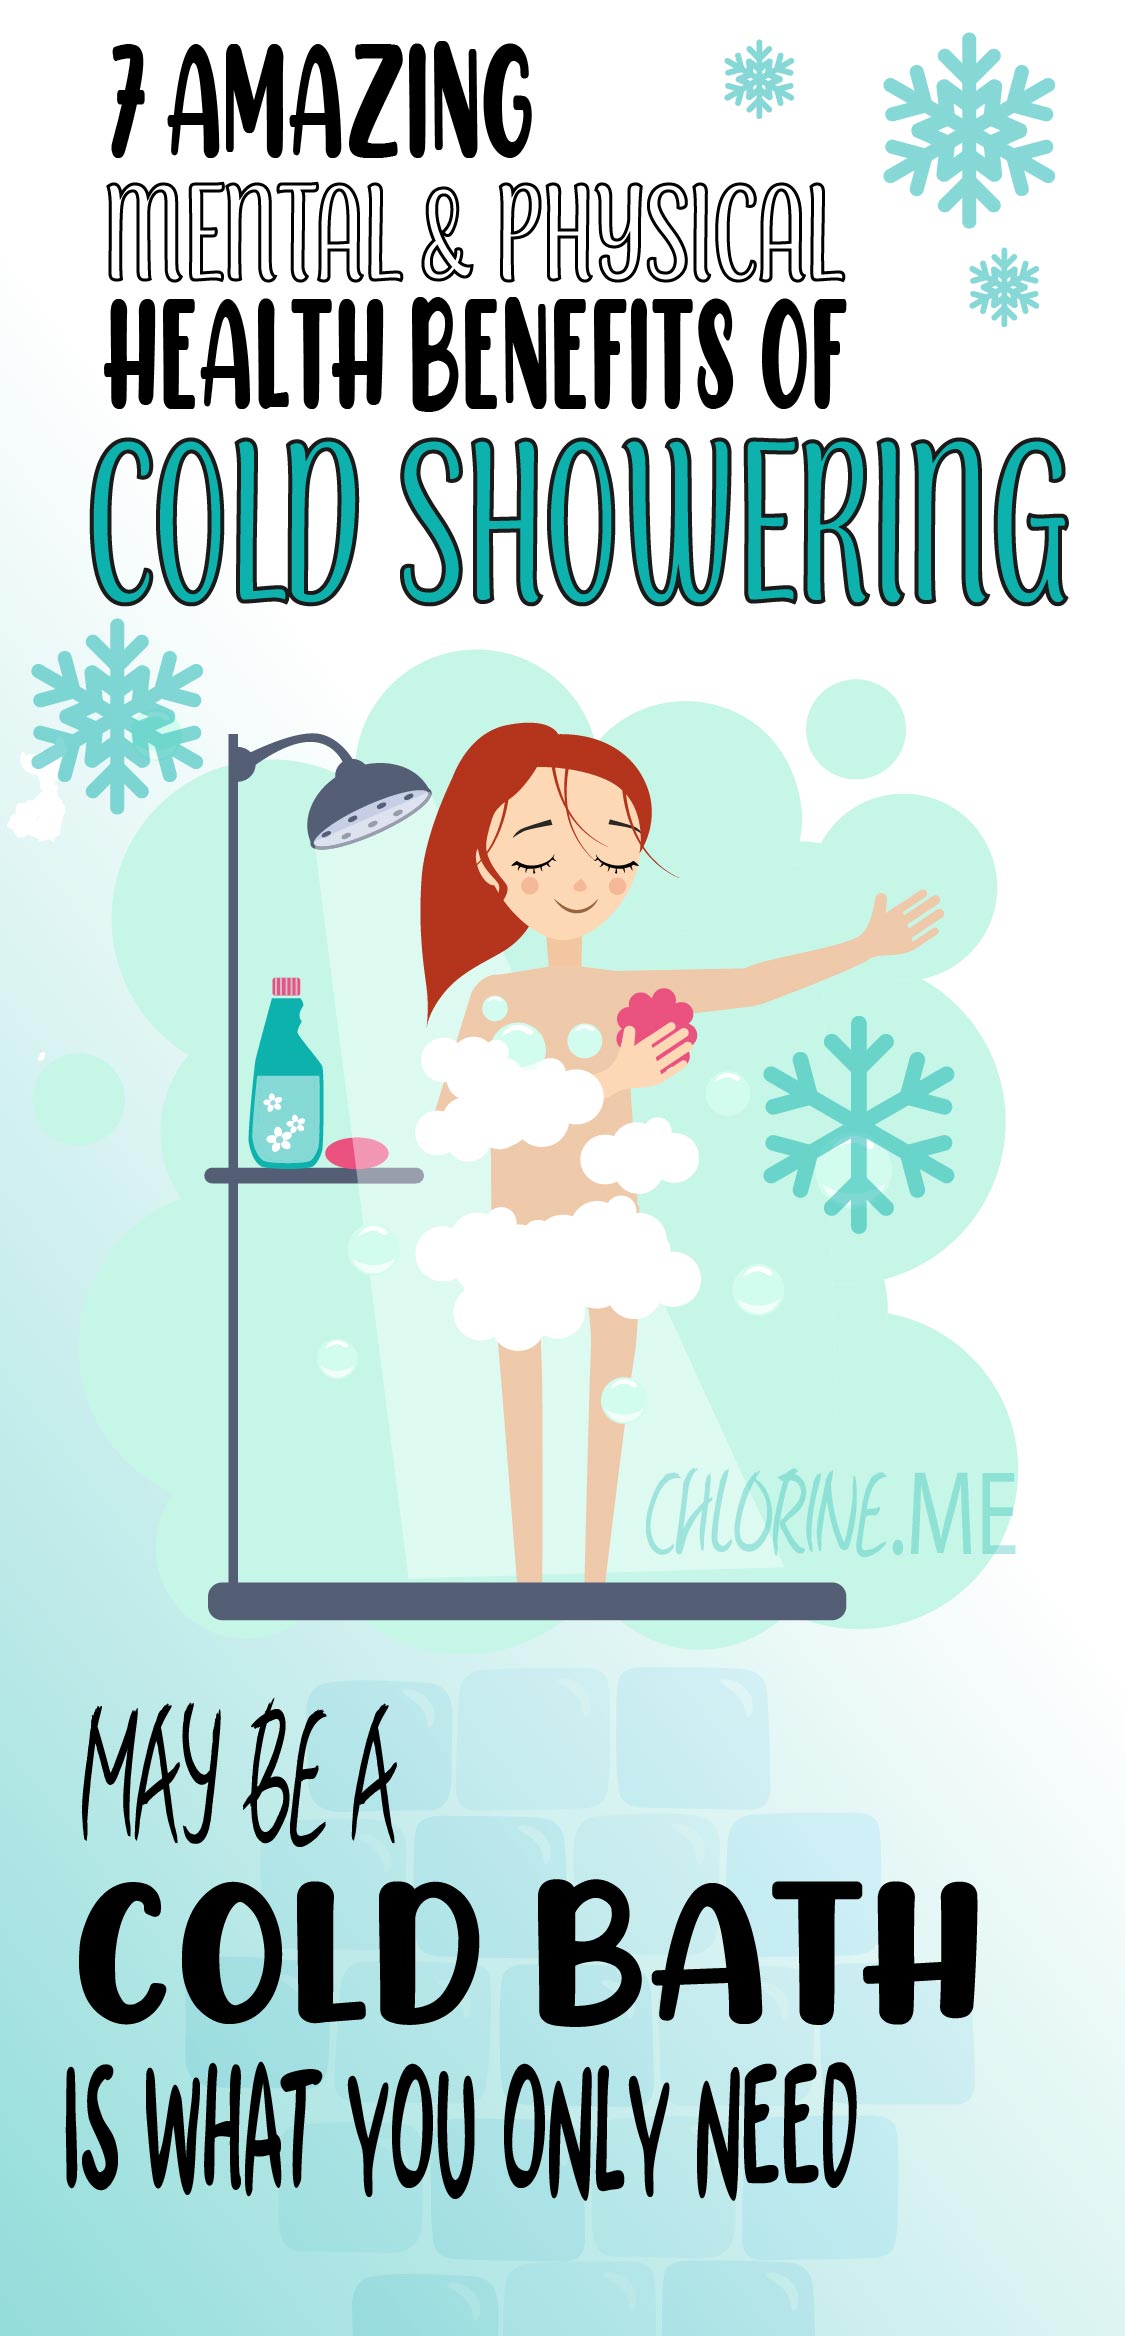 amazing health benefits of cold bath cold shower